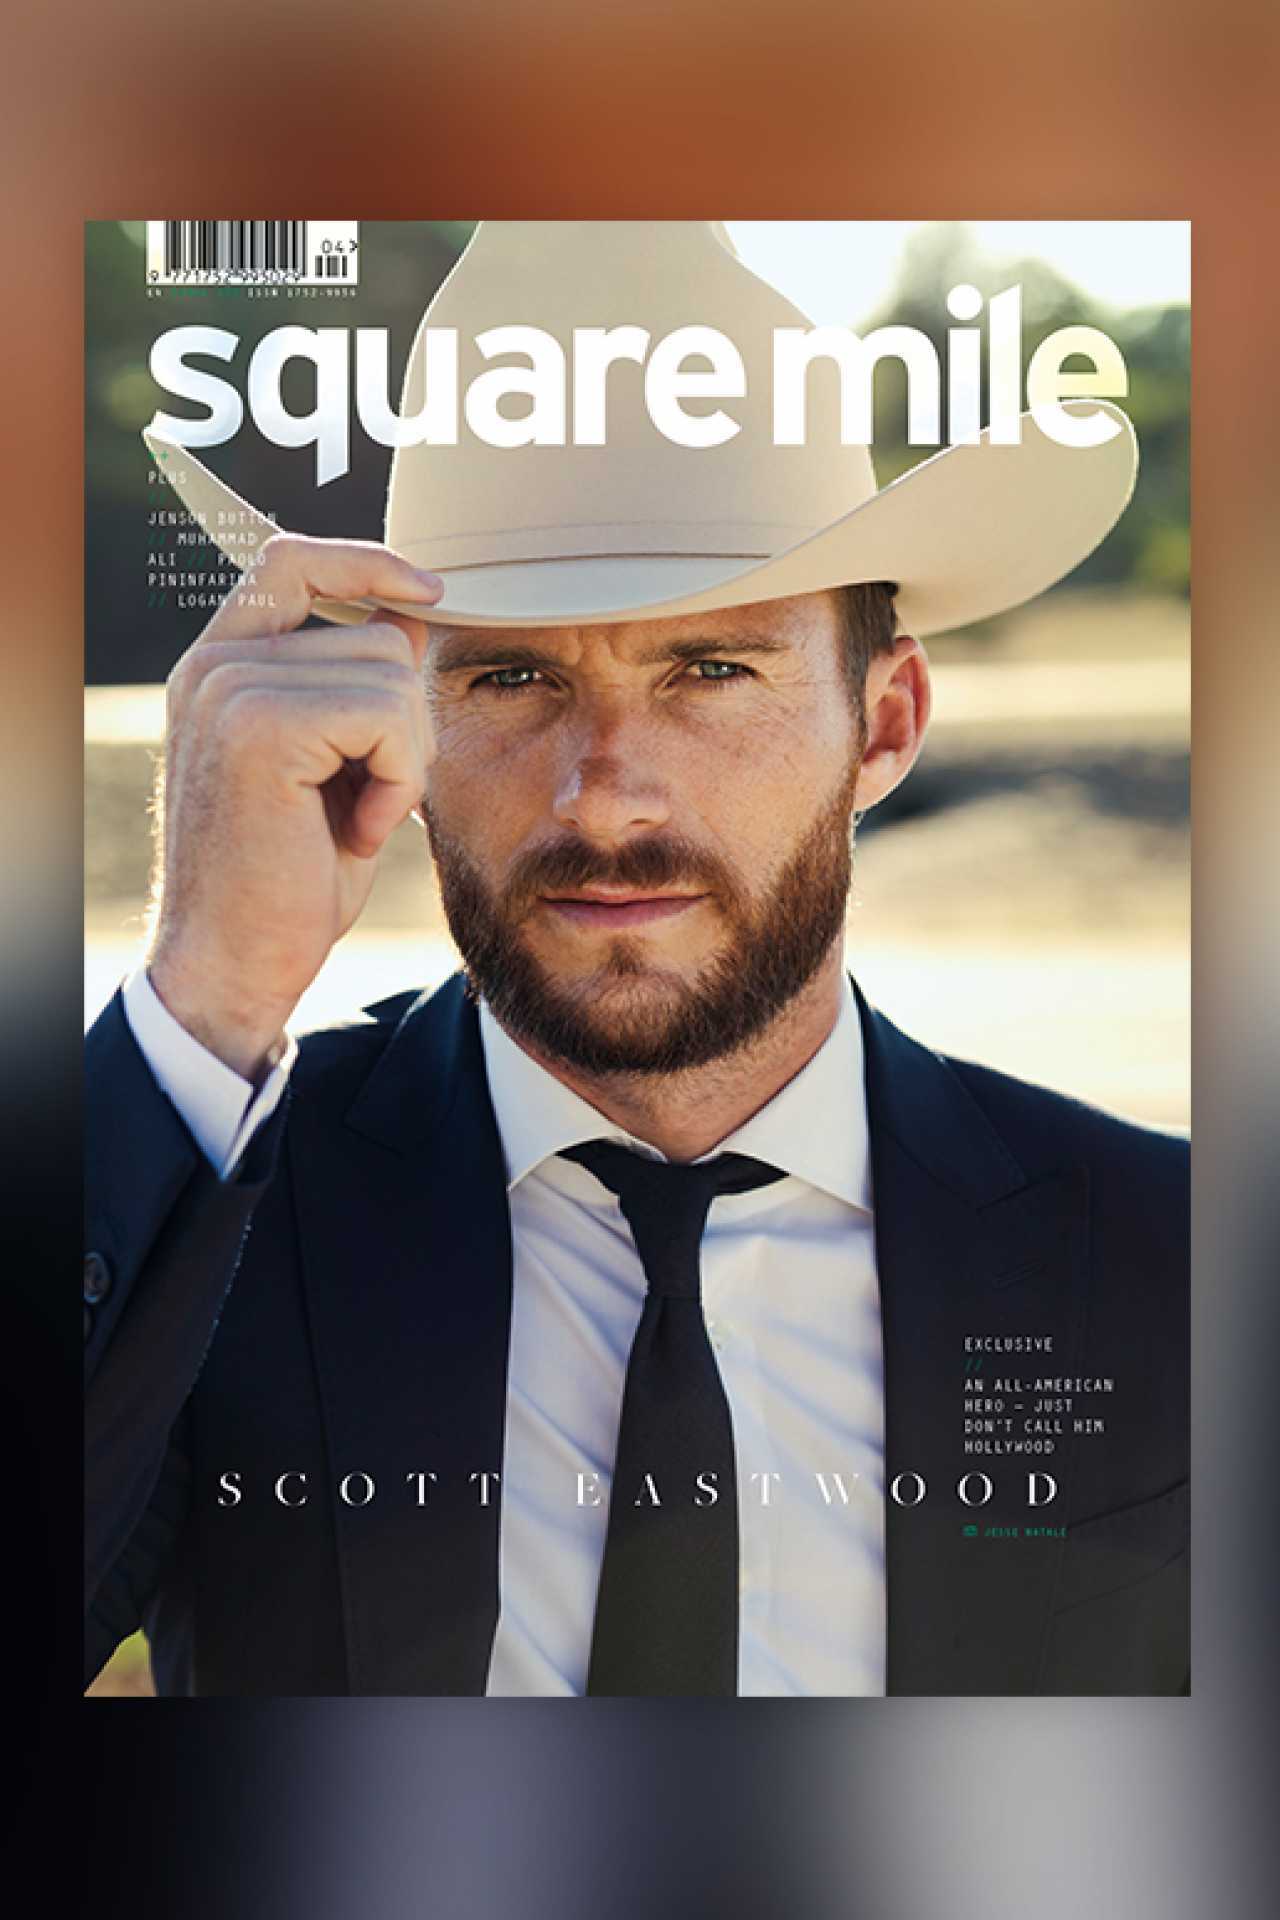 Scott Eastwood cover star - Square Mile magazine issue 153 - shot by Jesse Natale - Newsstand Edition